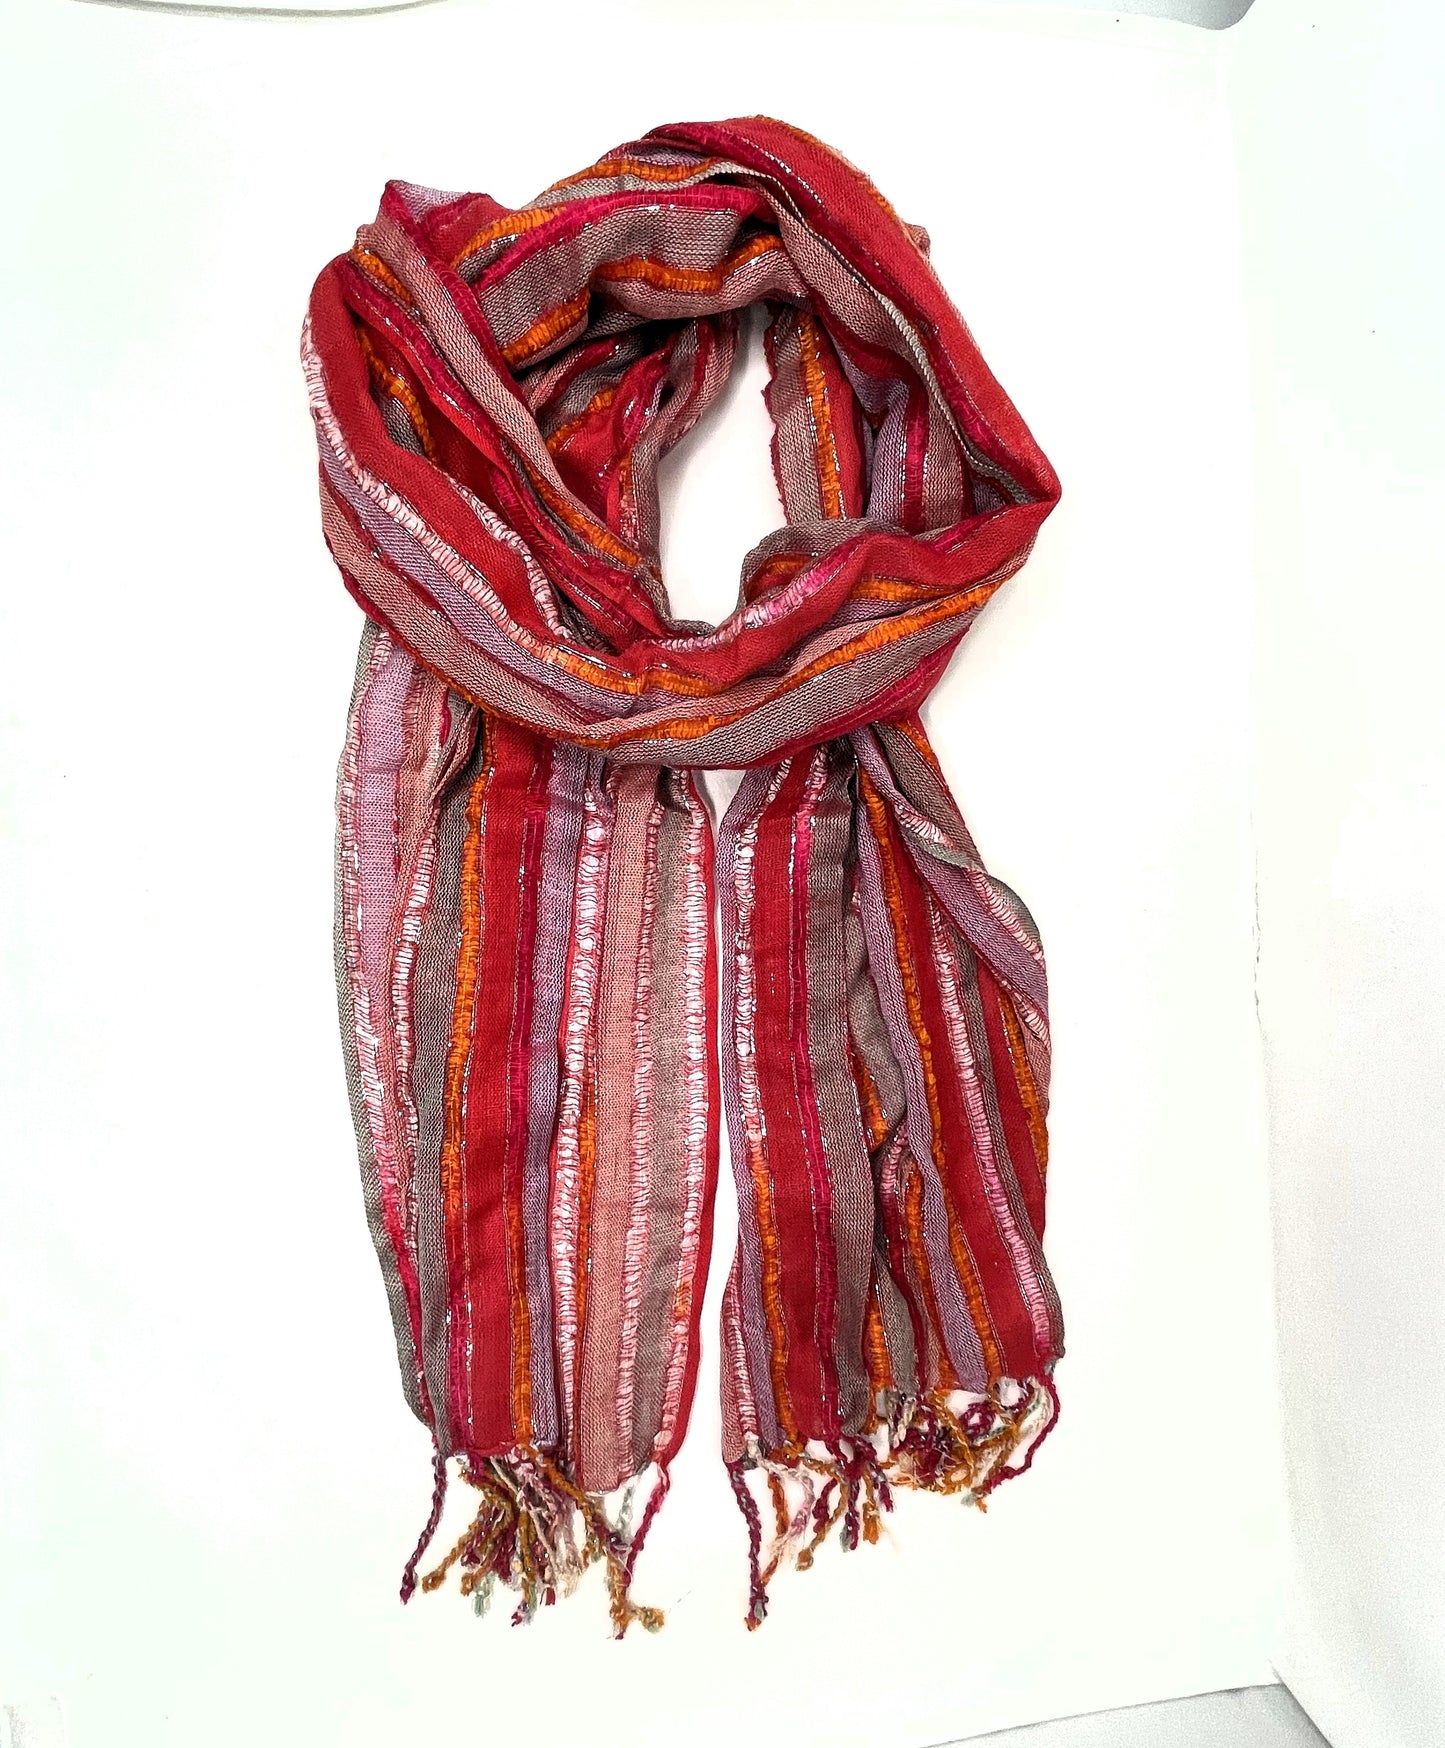 Beautiful reds with Silver Stripes Thin & Lightweight Fashion Scarf